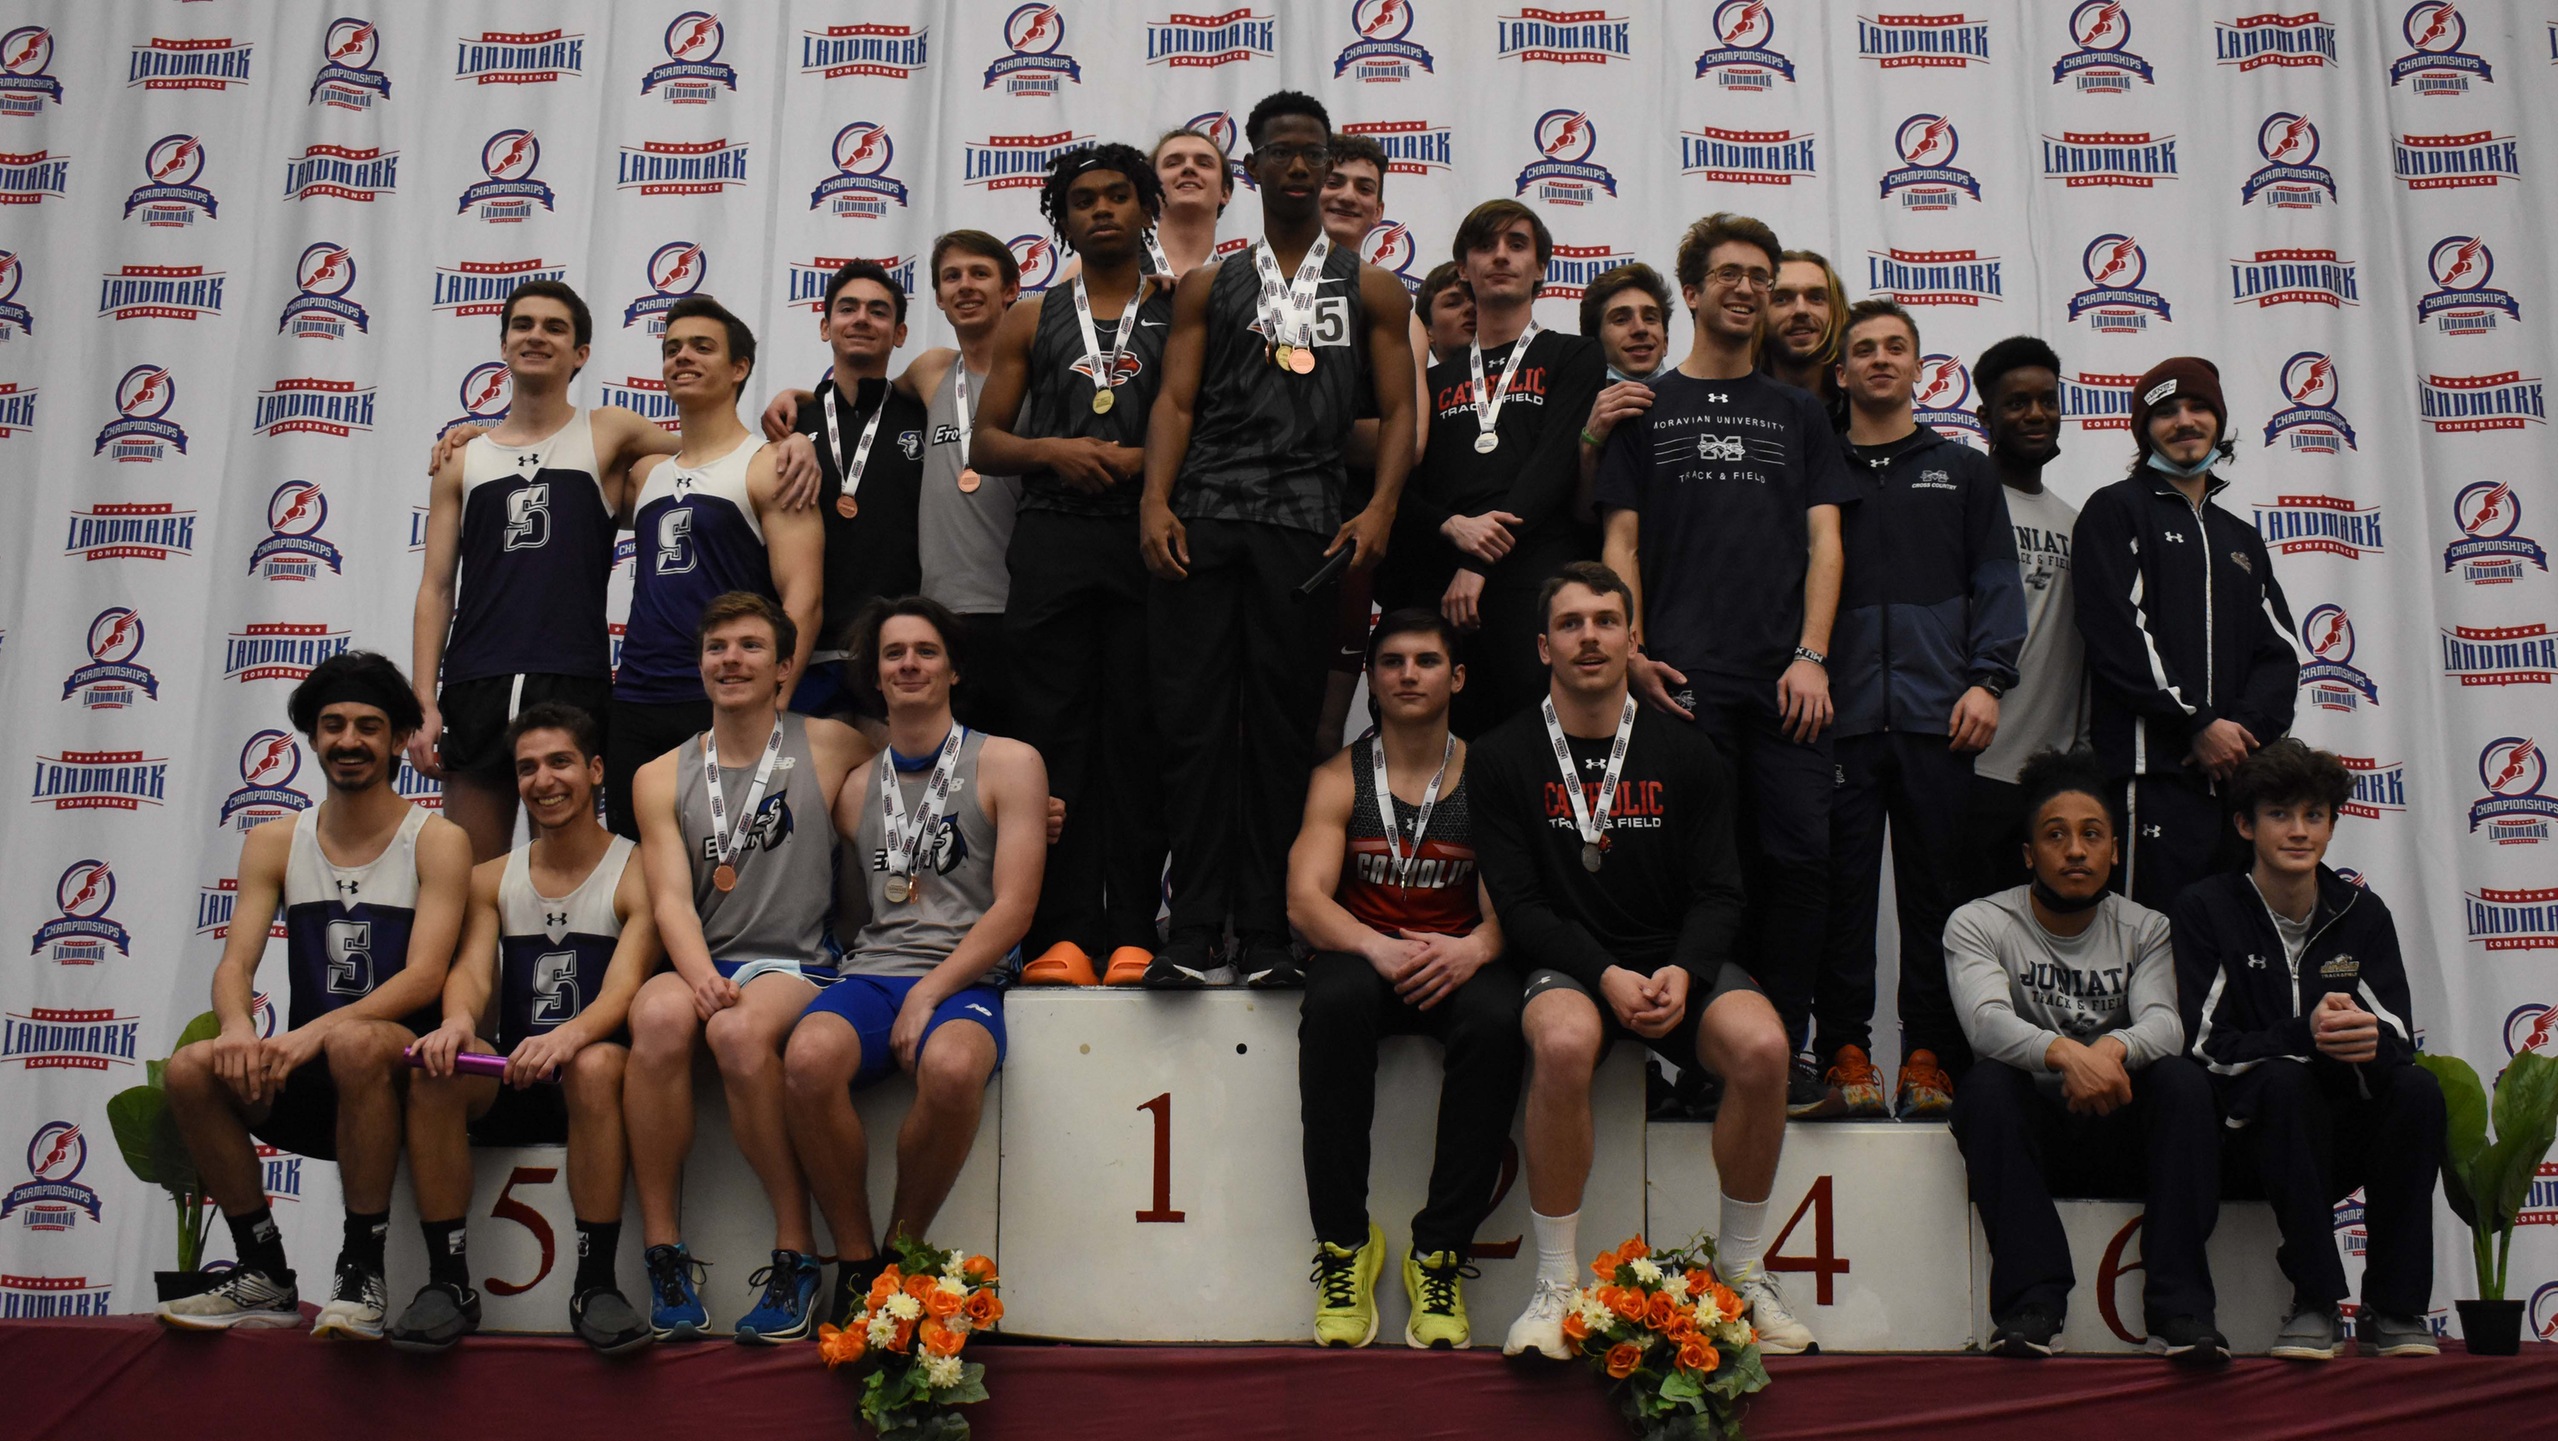 Indoor Season Concludes with Landmark Champs at Susquehanna